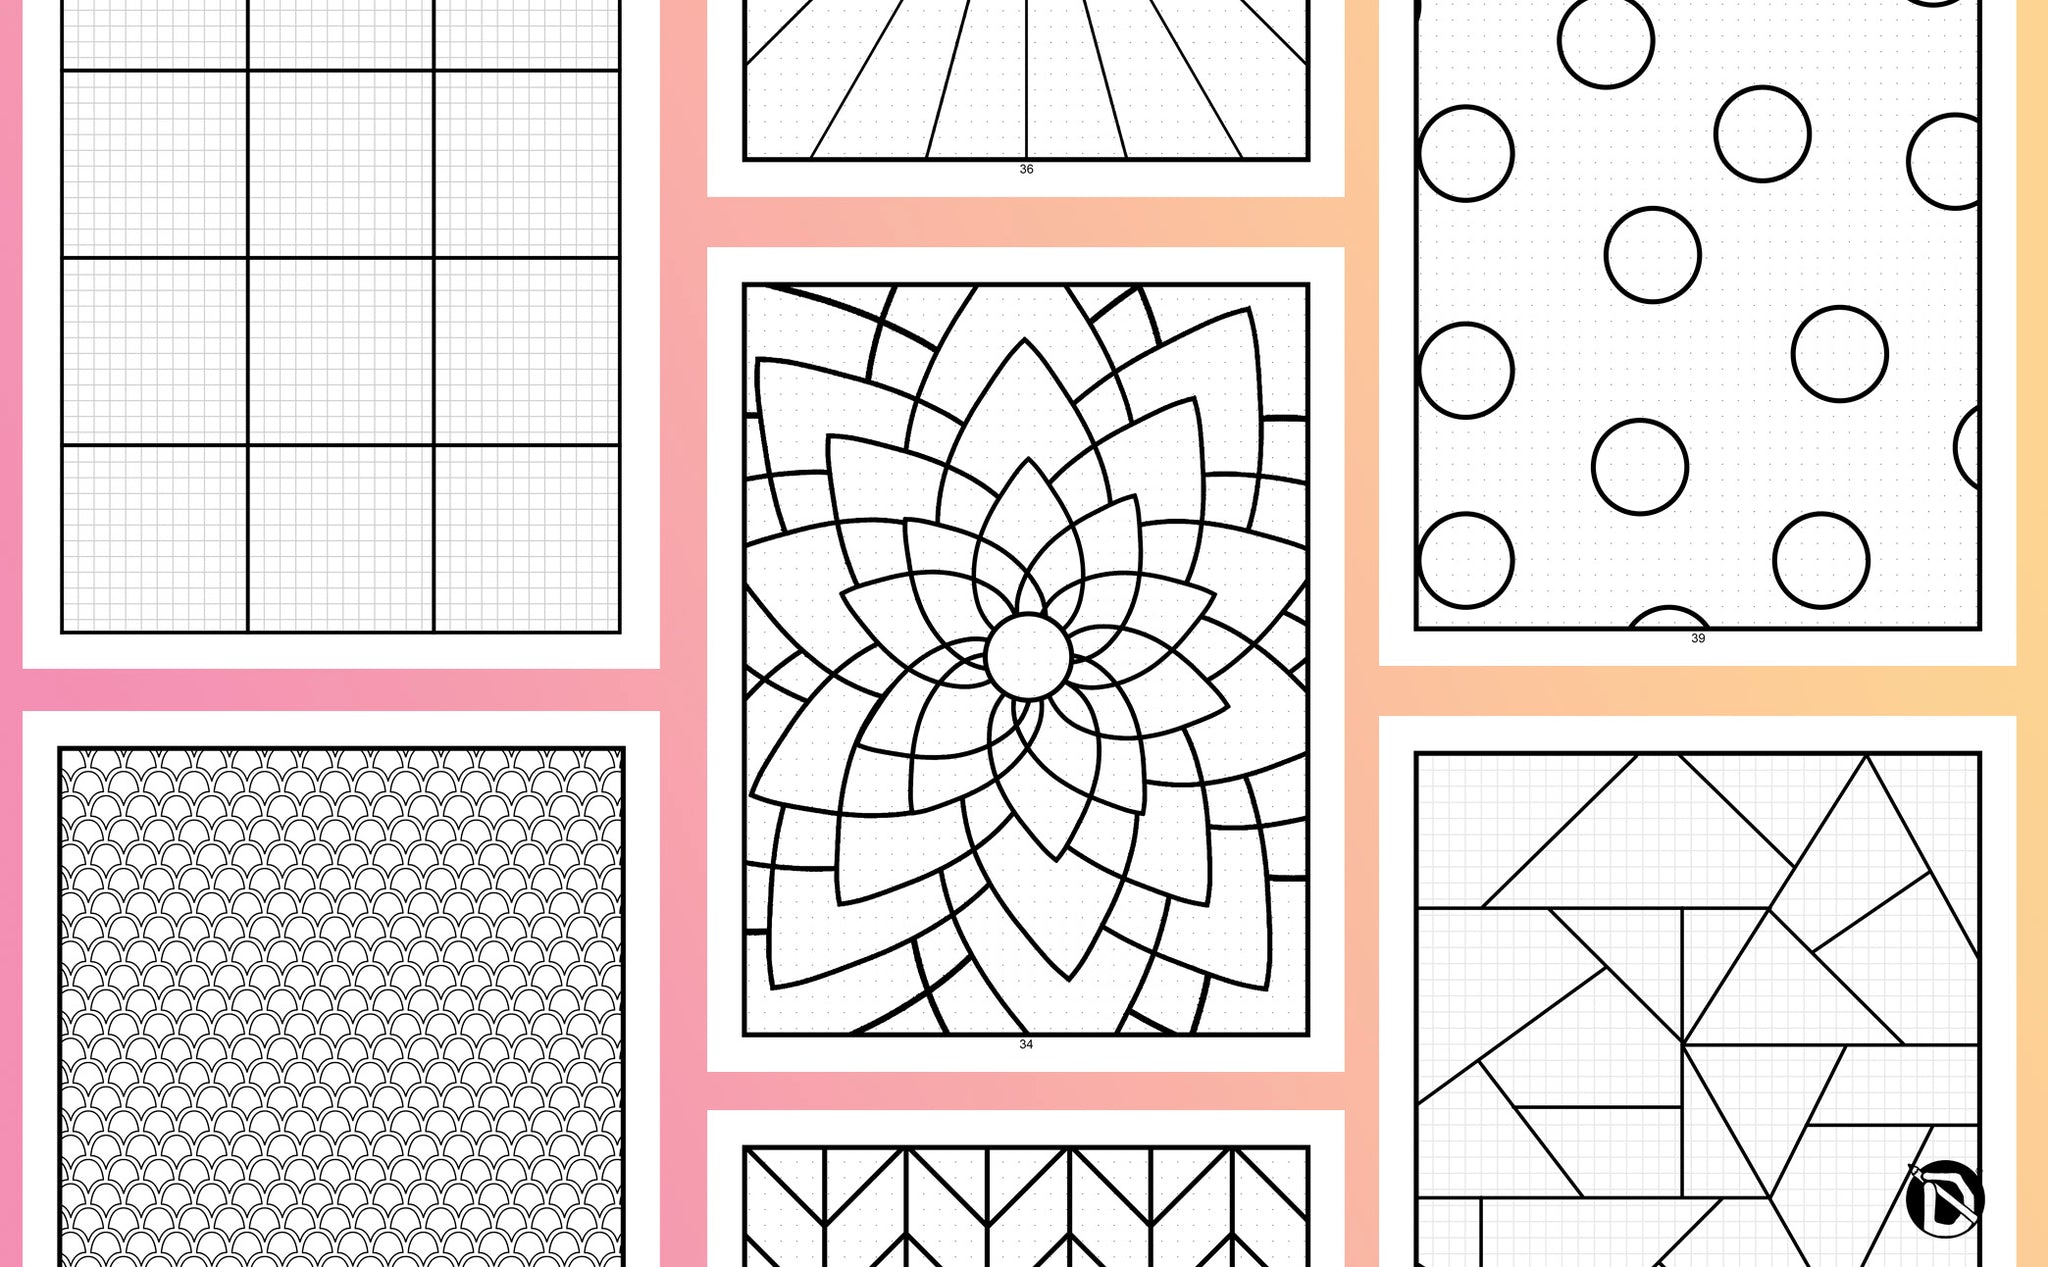 Simple Textures And Patterns (1-70) by CatherineWhite on DeviantArt